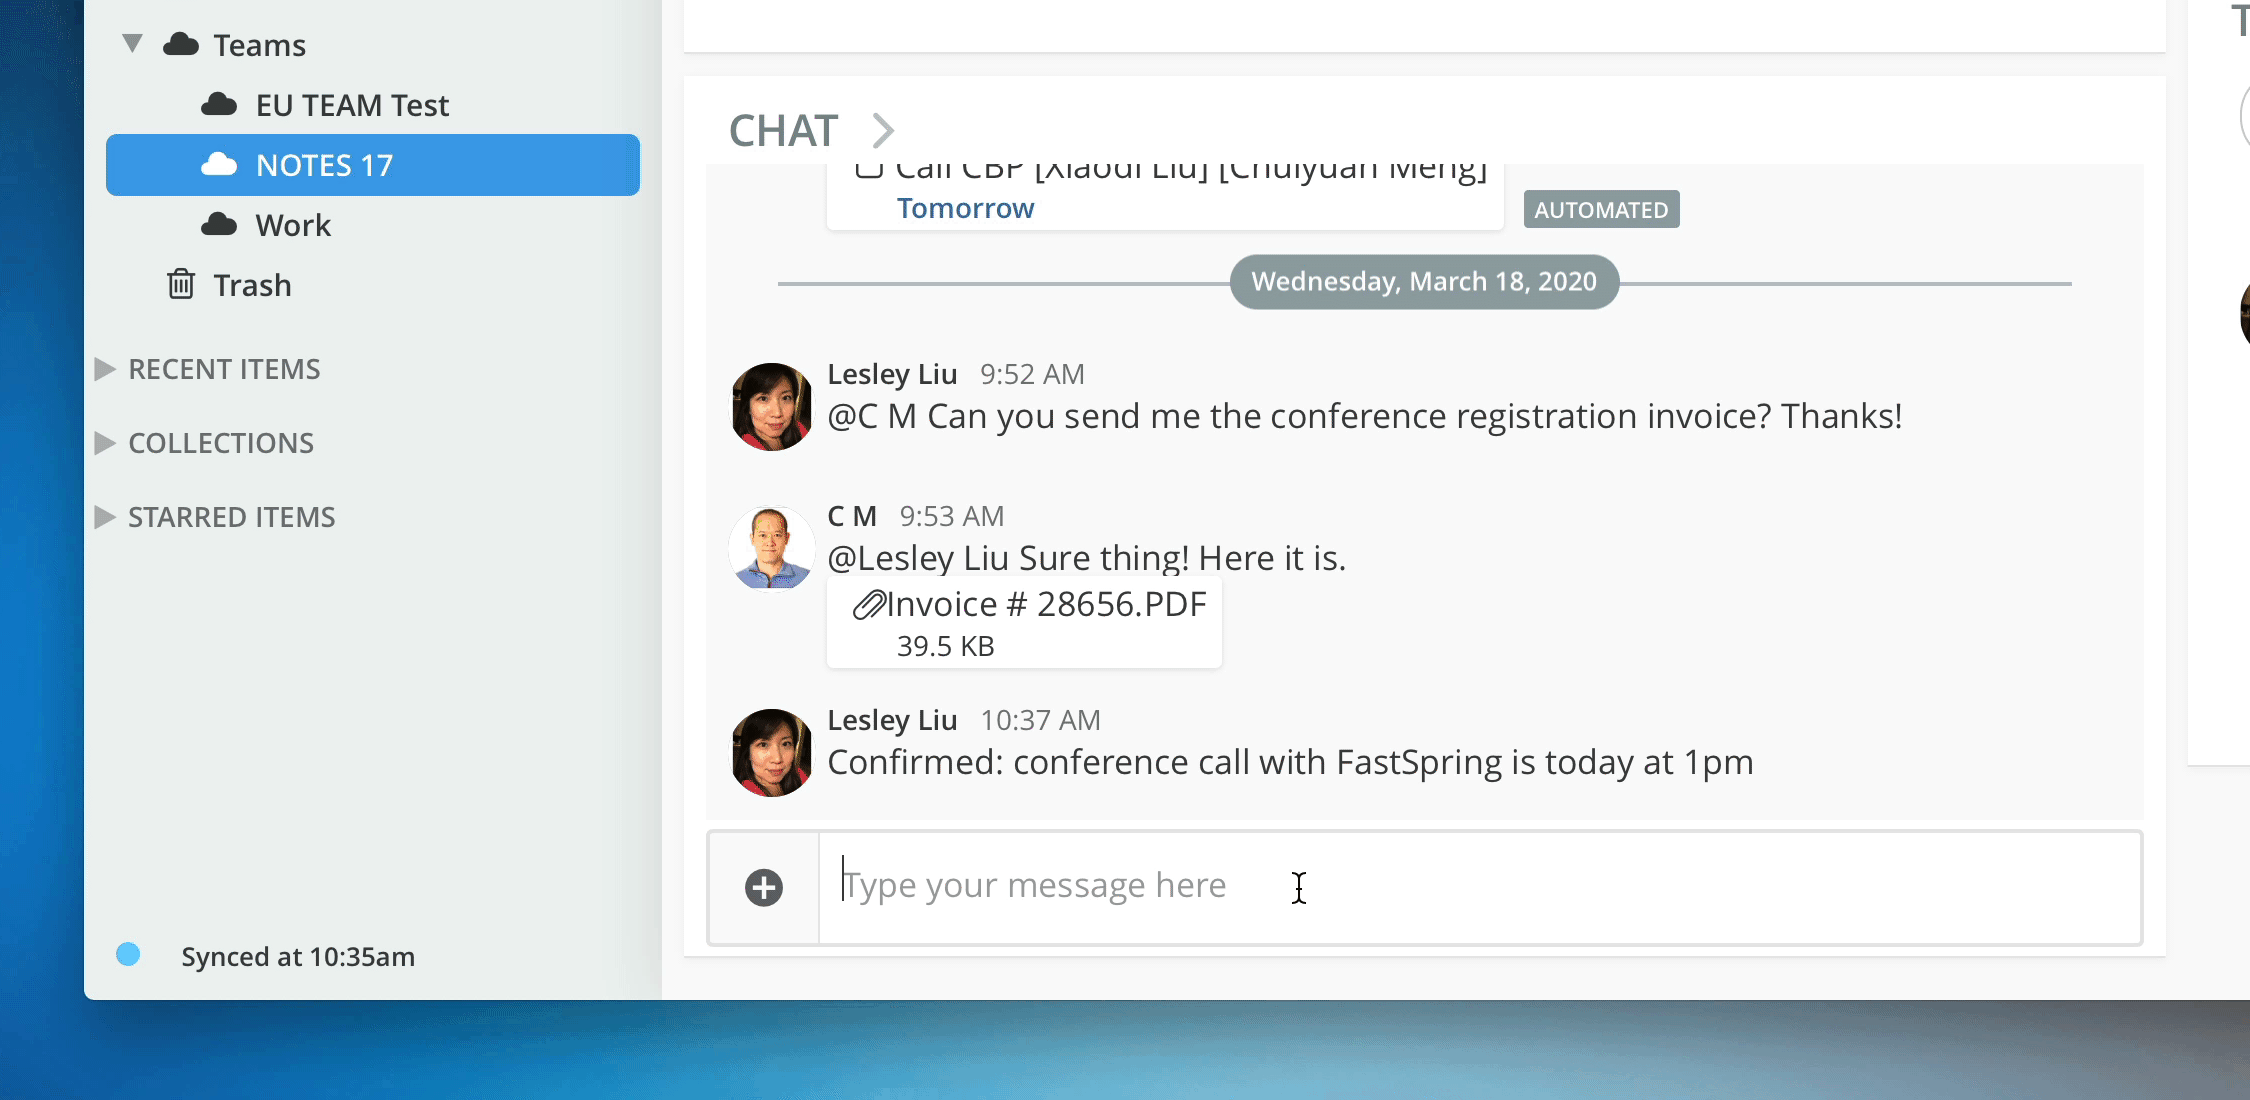 The new Team Chat feature in Pagico 9